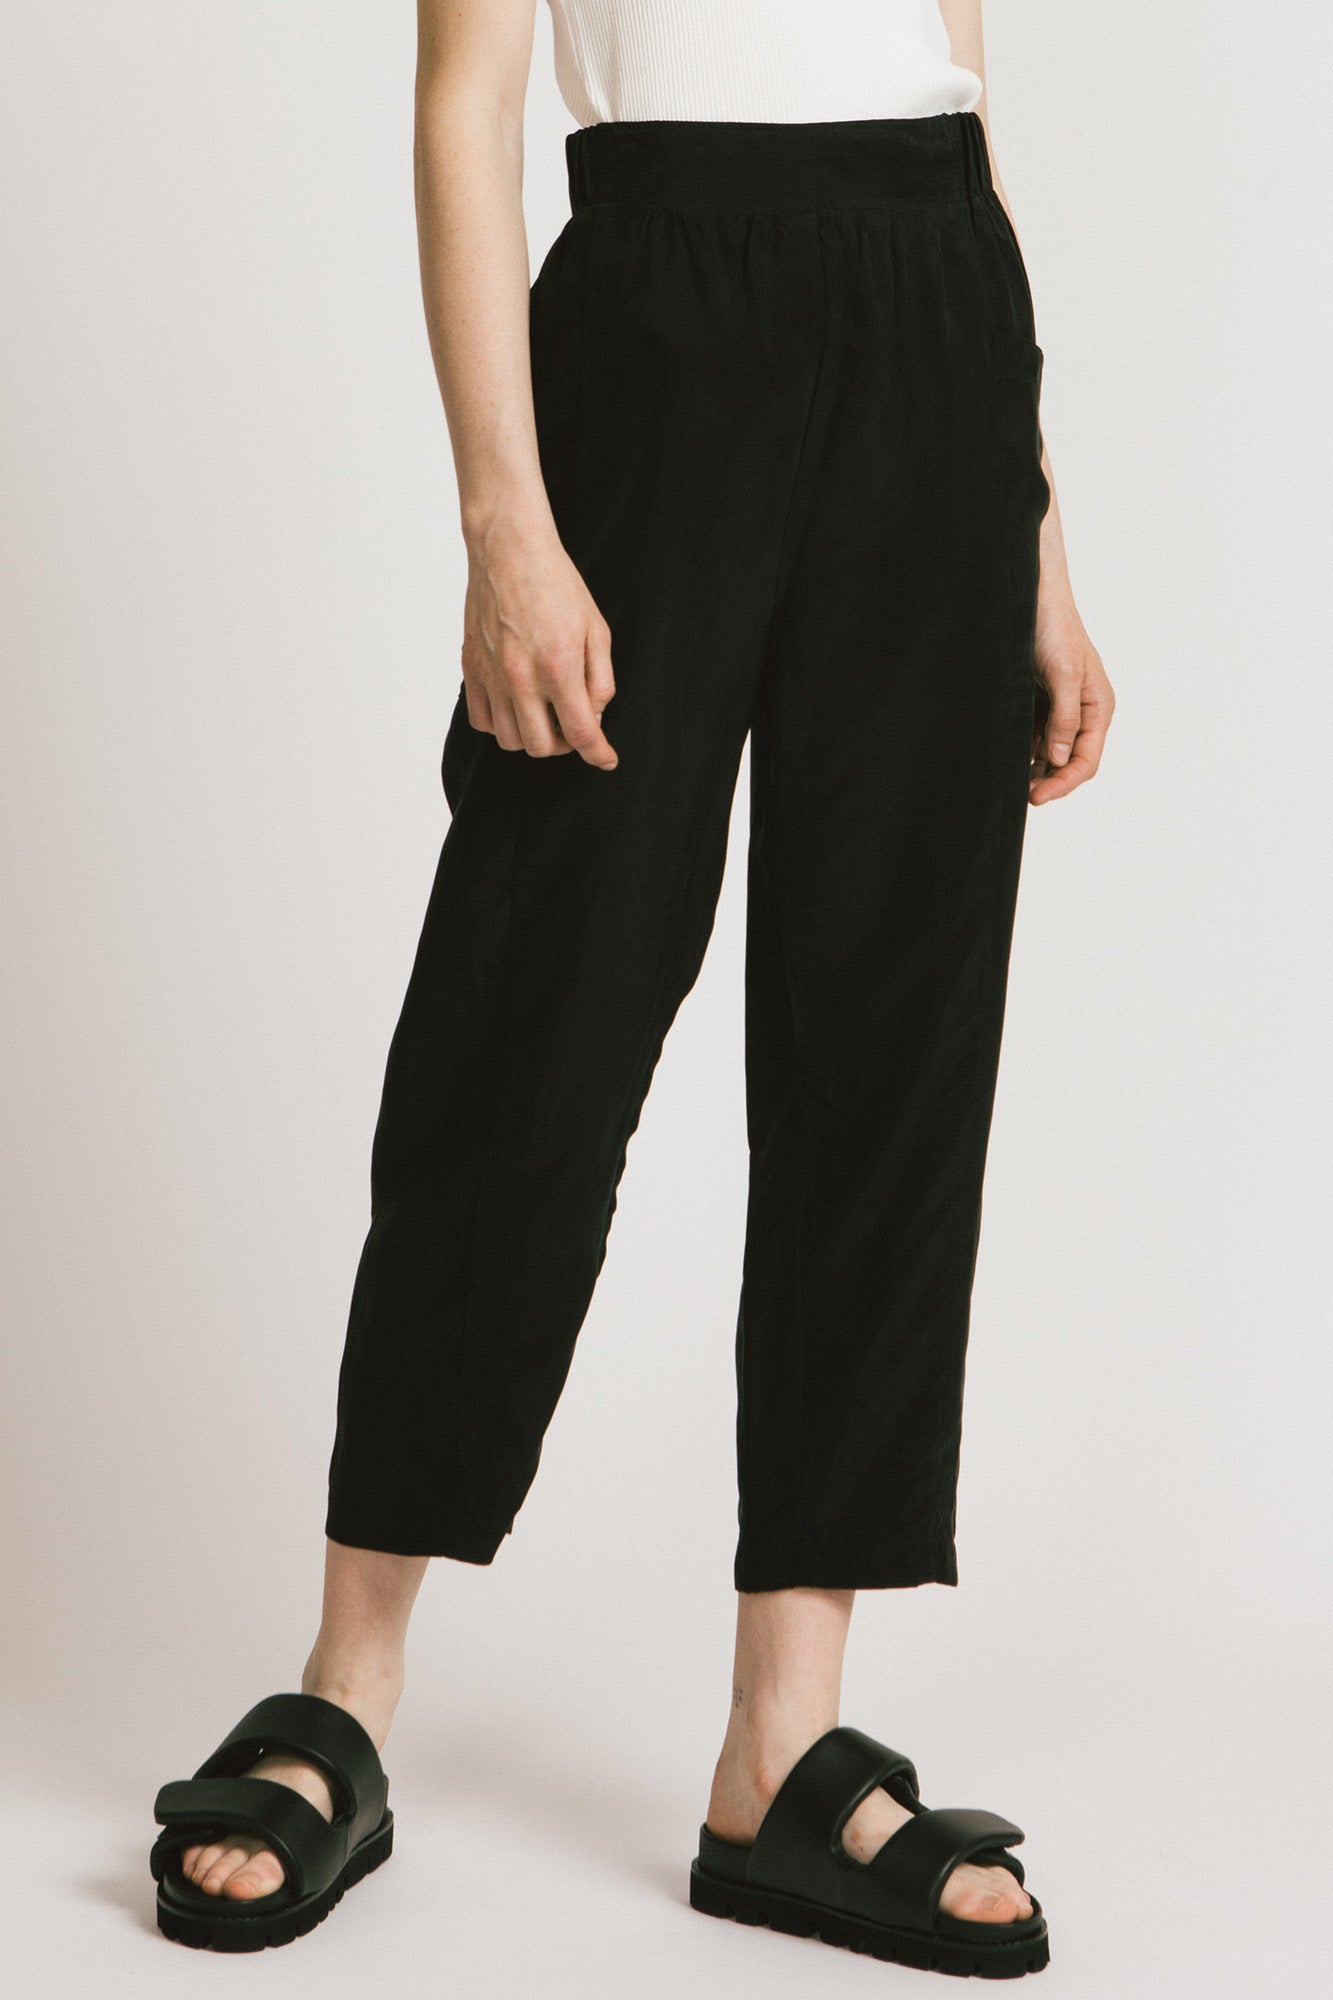 Willow & Root Plaid Trouser Pant - Women's Pants in Taupe Black